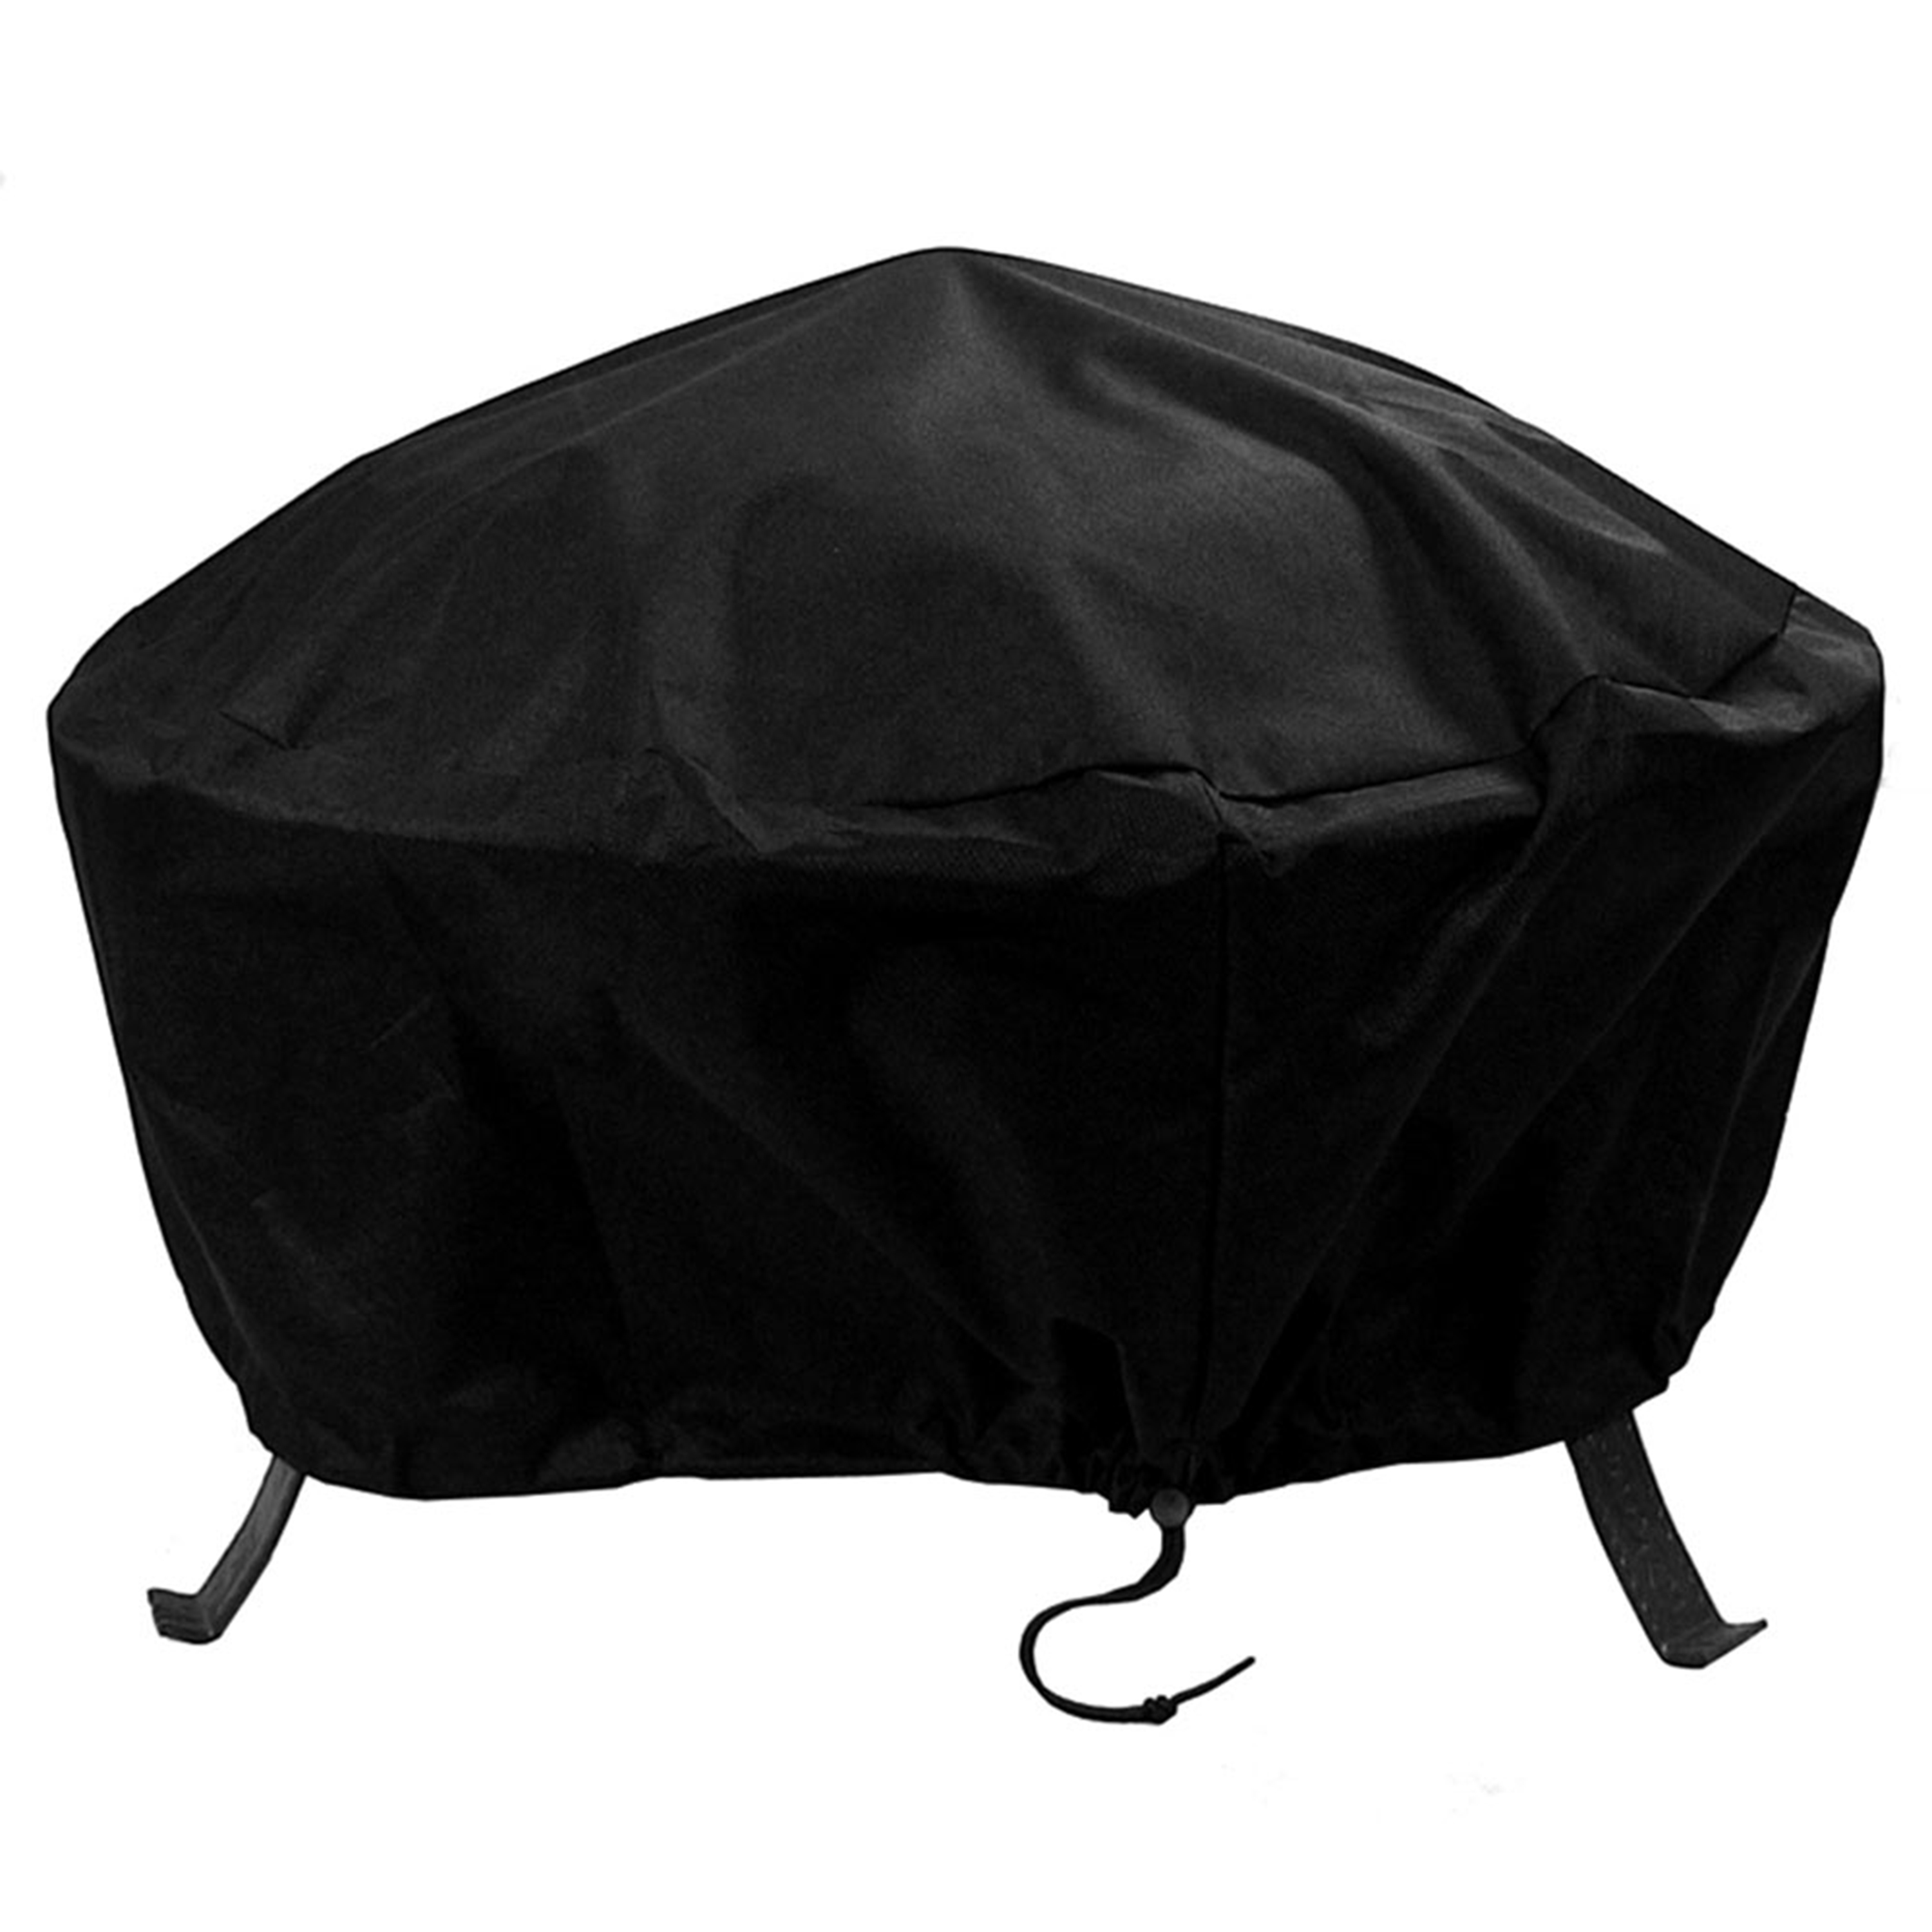 Sunnydaze Round Black Fire Pit Cover, Size Options Available, 60-inch Diameter